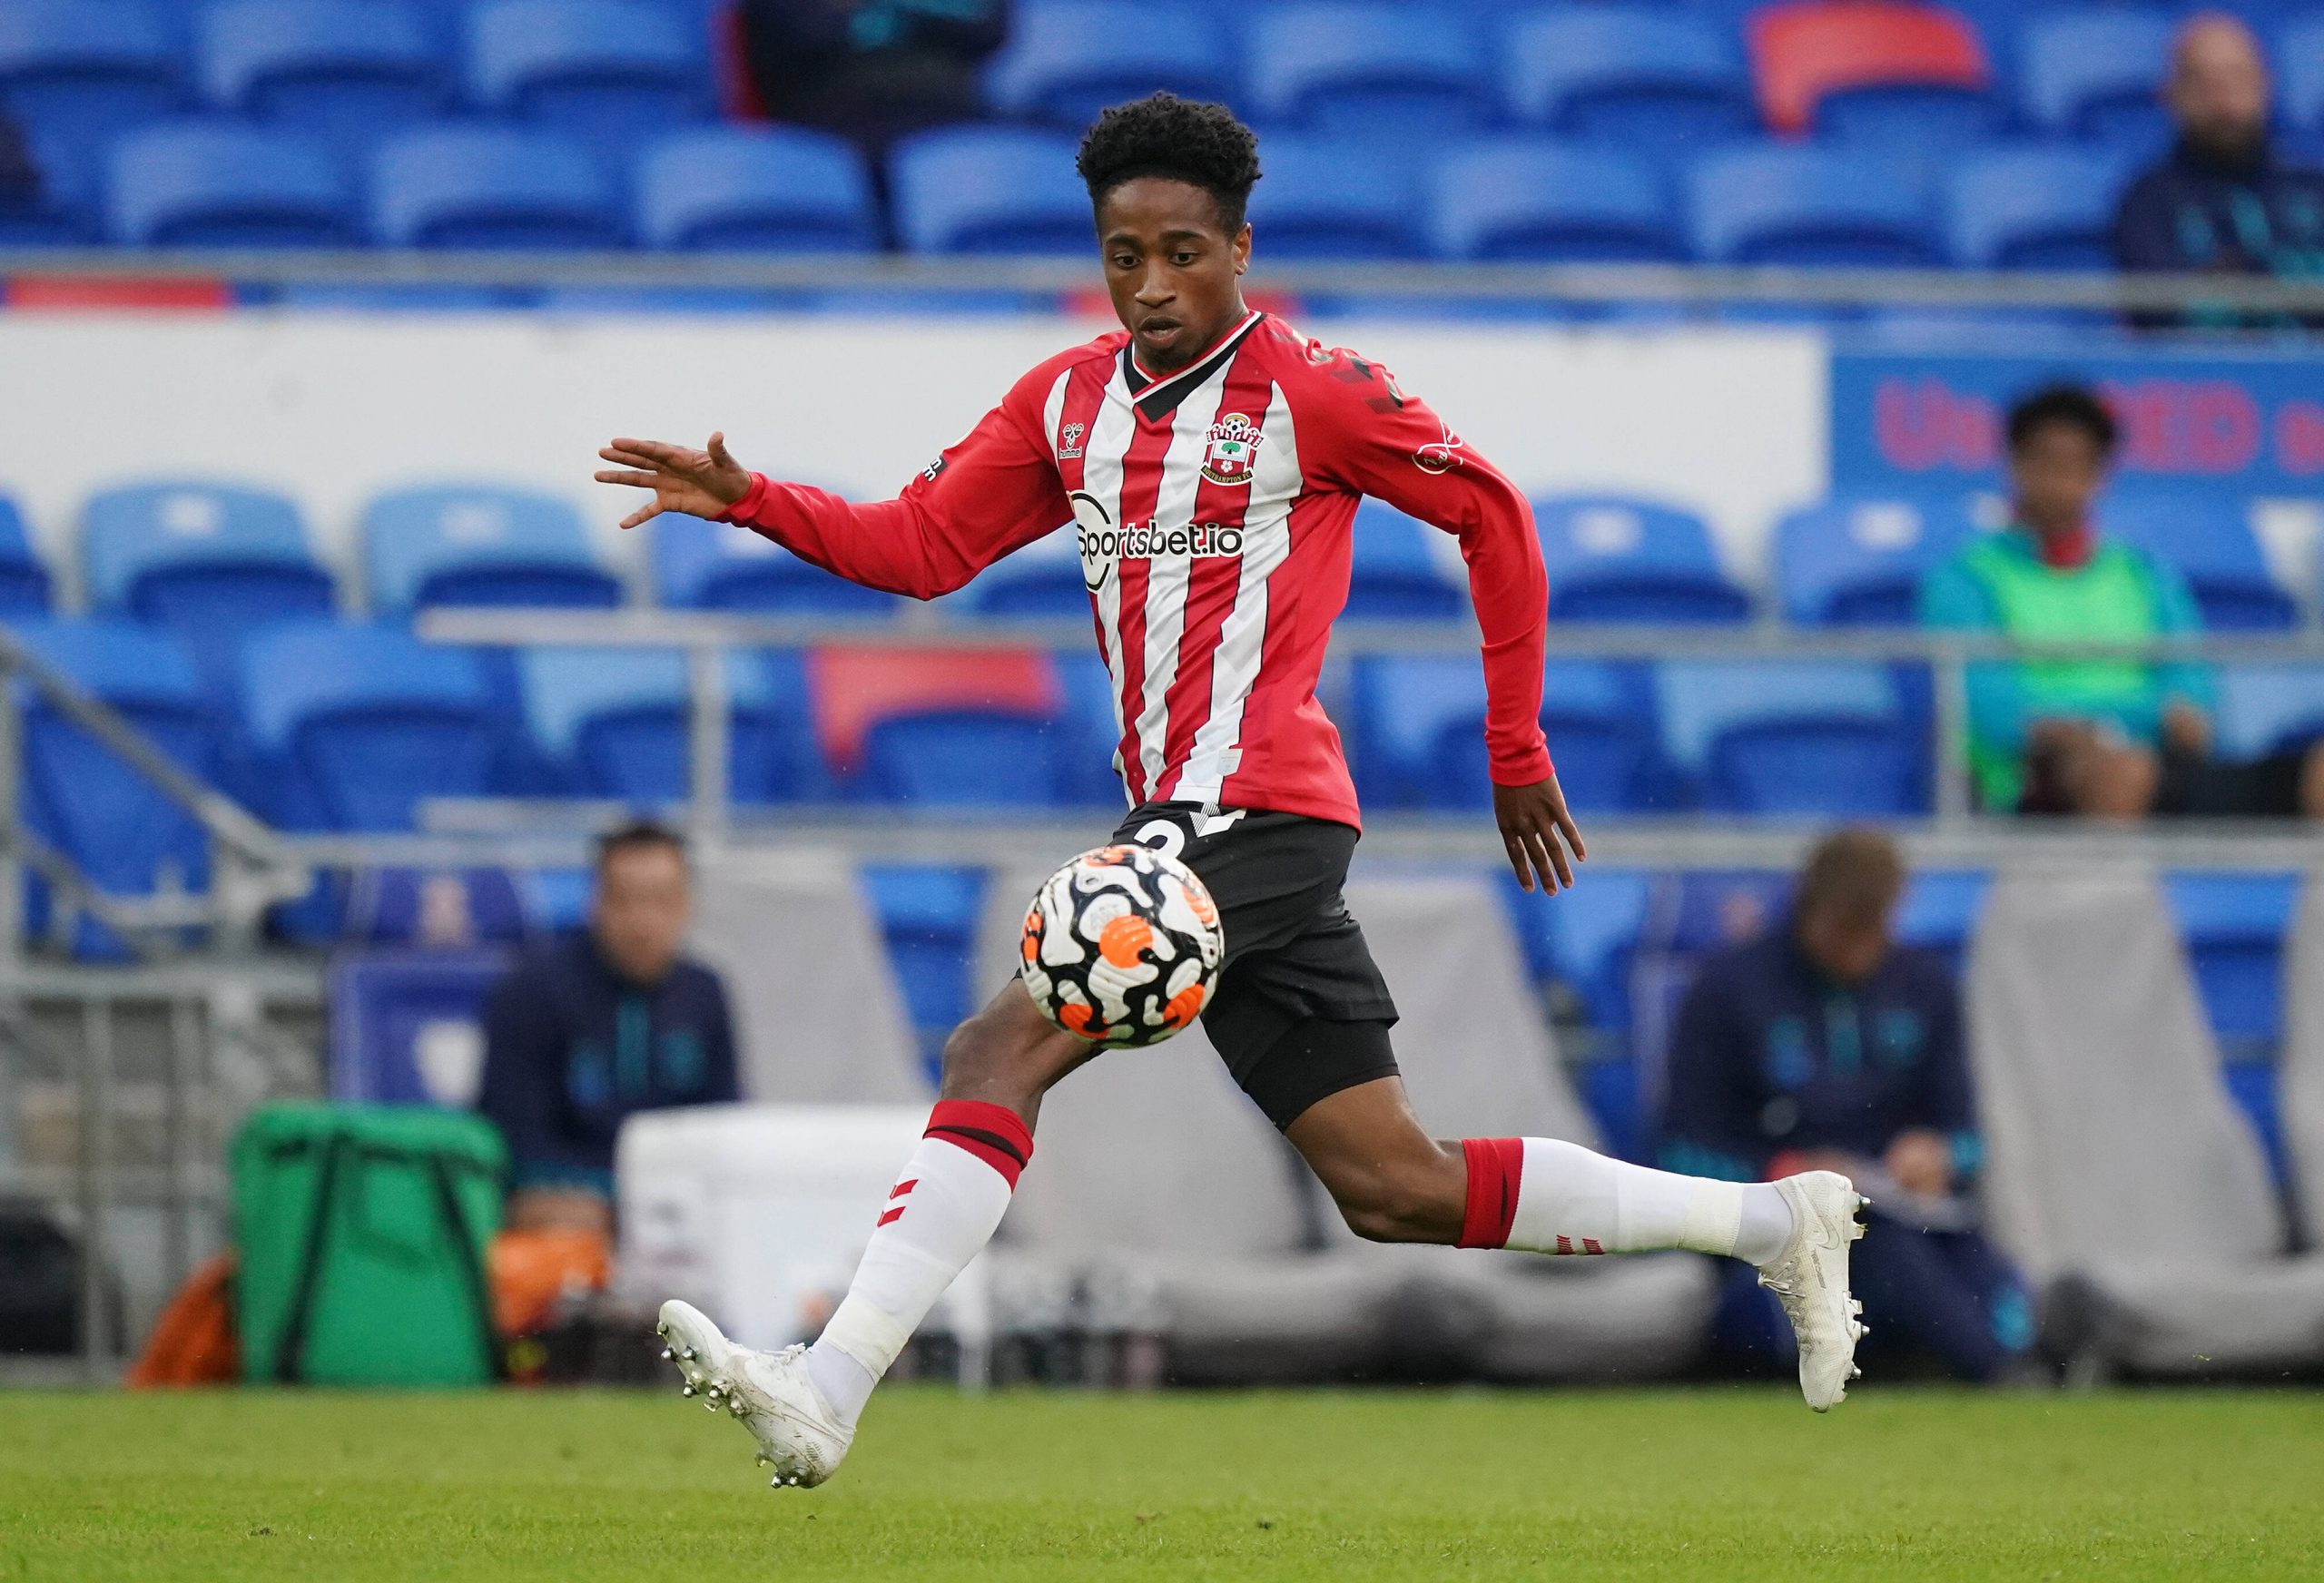 Kyle Walker-Peters in a friendly for Southampton against Cardiff City. Copyright: Nick Potts 61298945